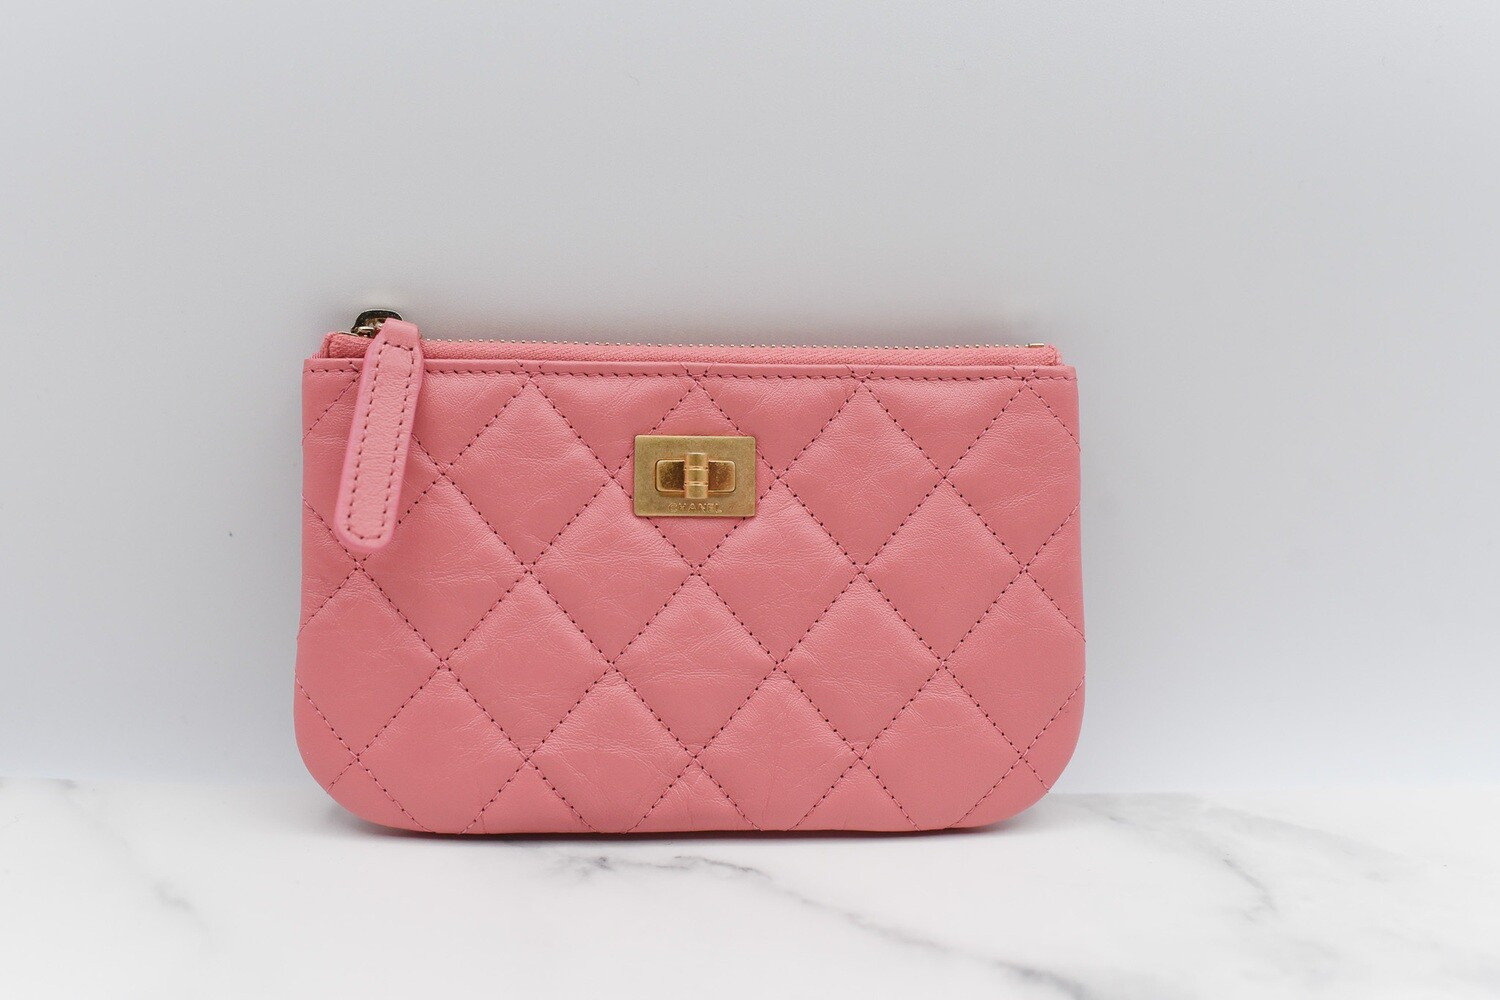 Chanel SLG Mini O Case Reissue, Pink Calfskin Leather with Gold Hardware,  New in Box GA001